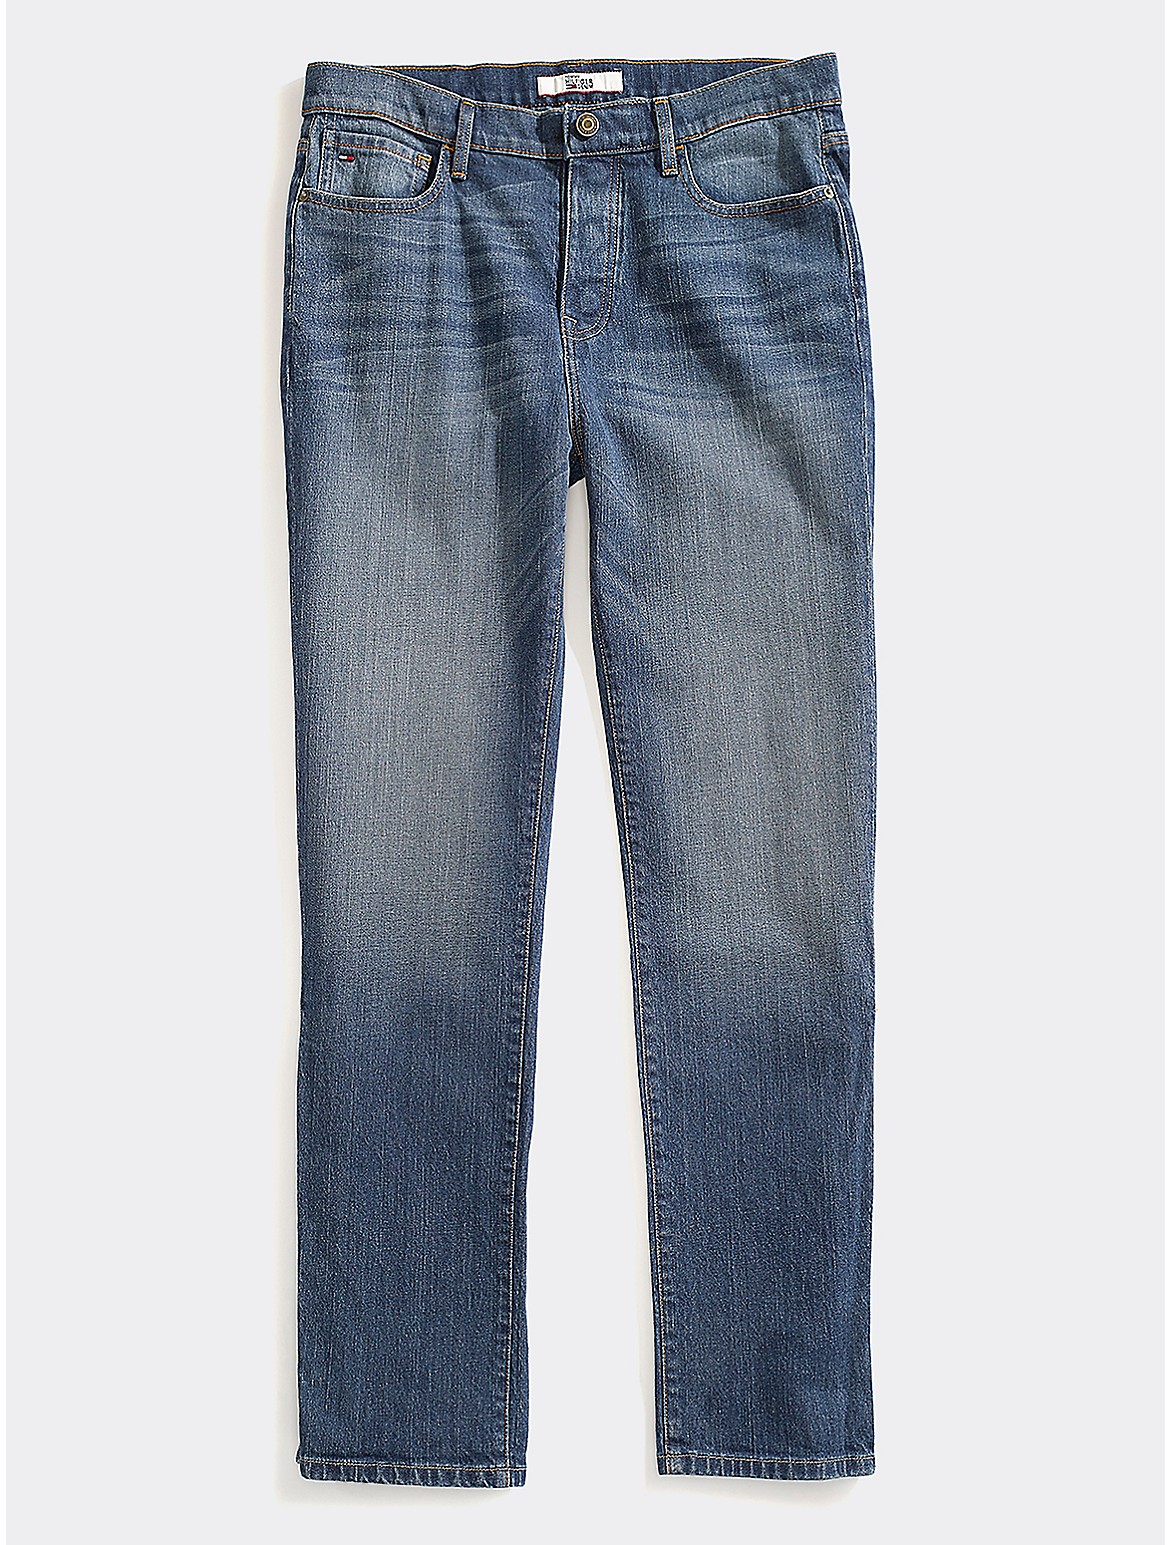 Tommy Hilfiger Relaxed Fit Jean In Medium Wash